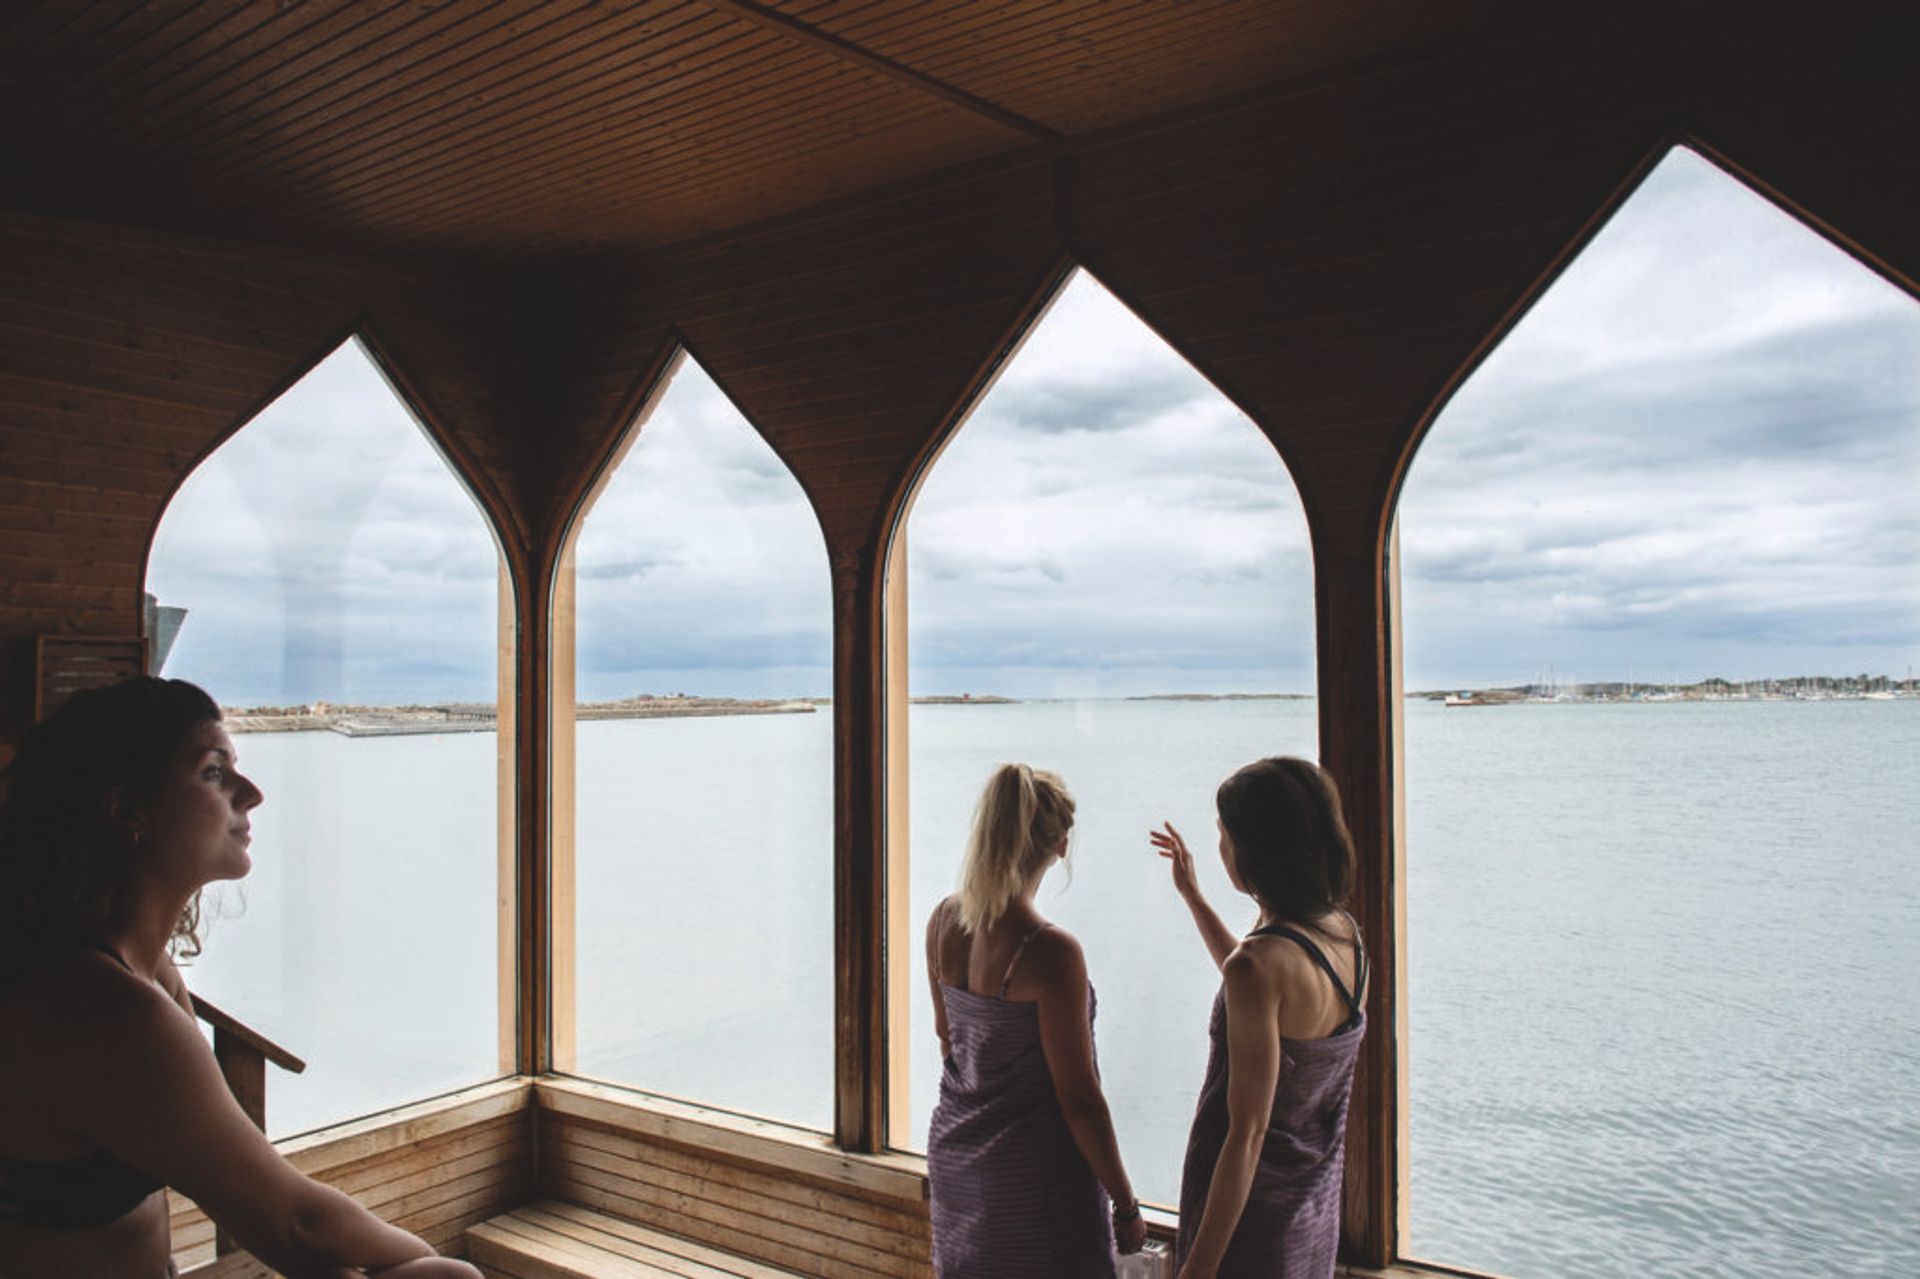 People in a sauna, looking out of the window.